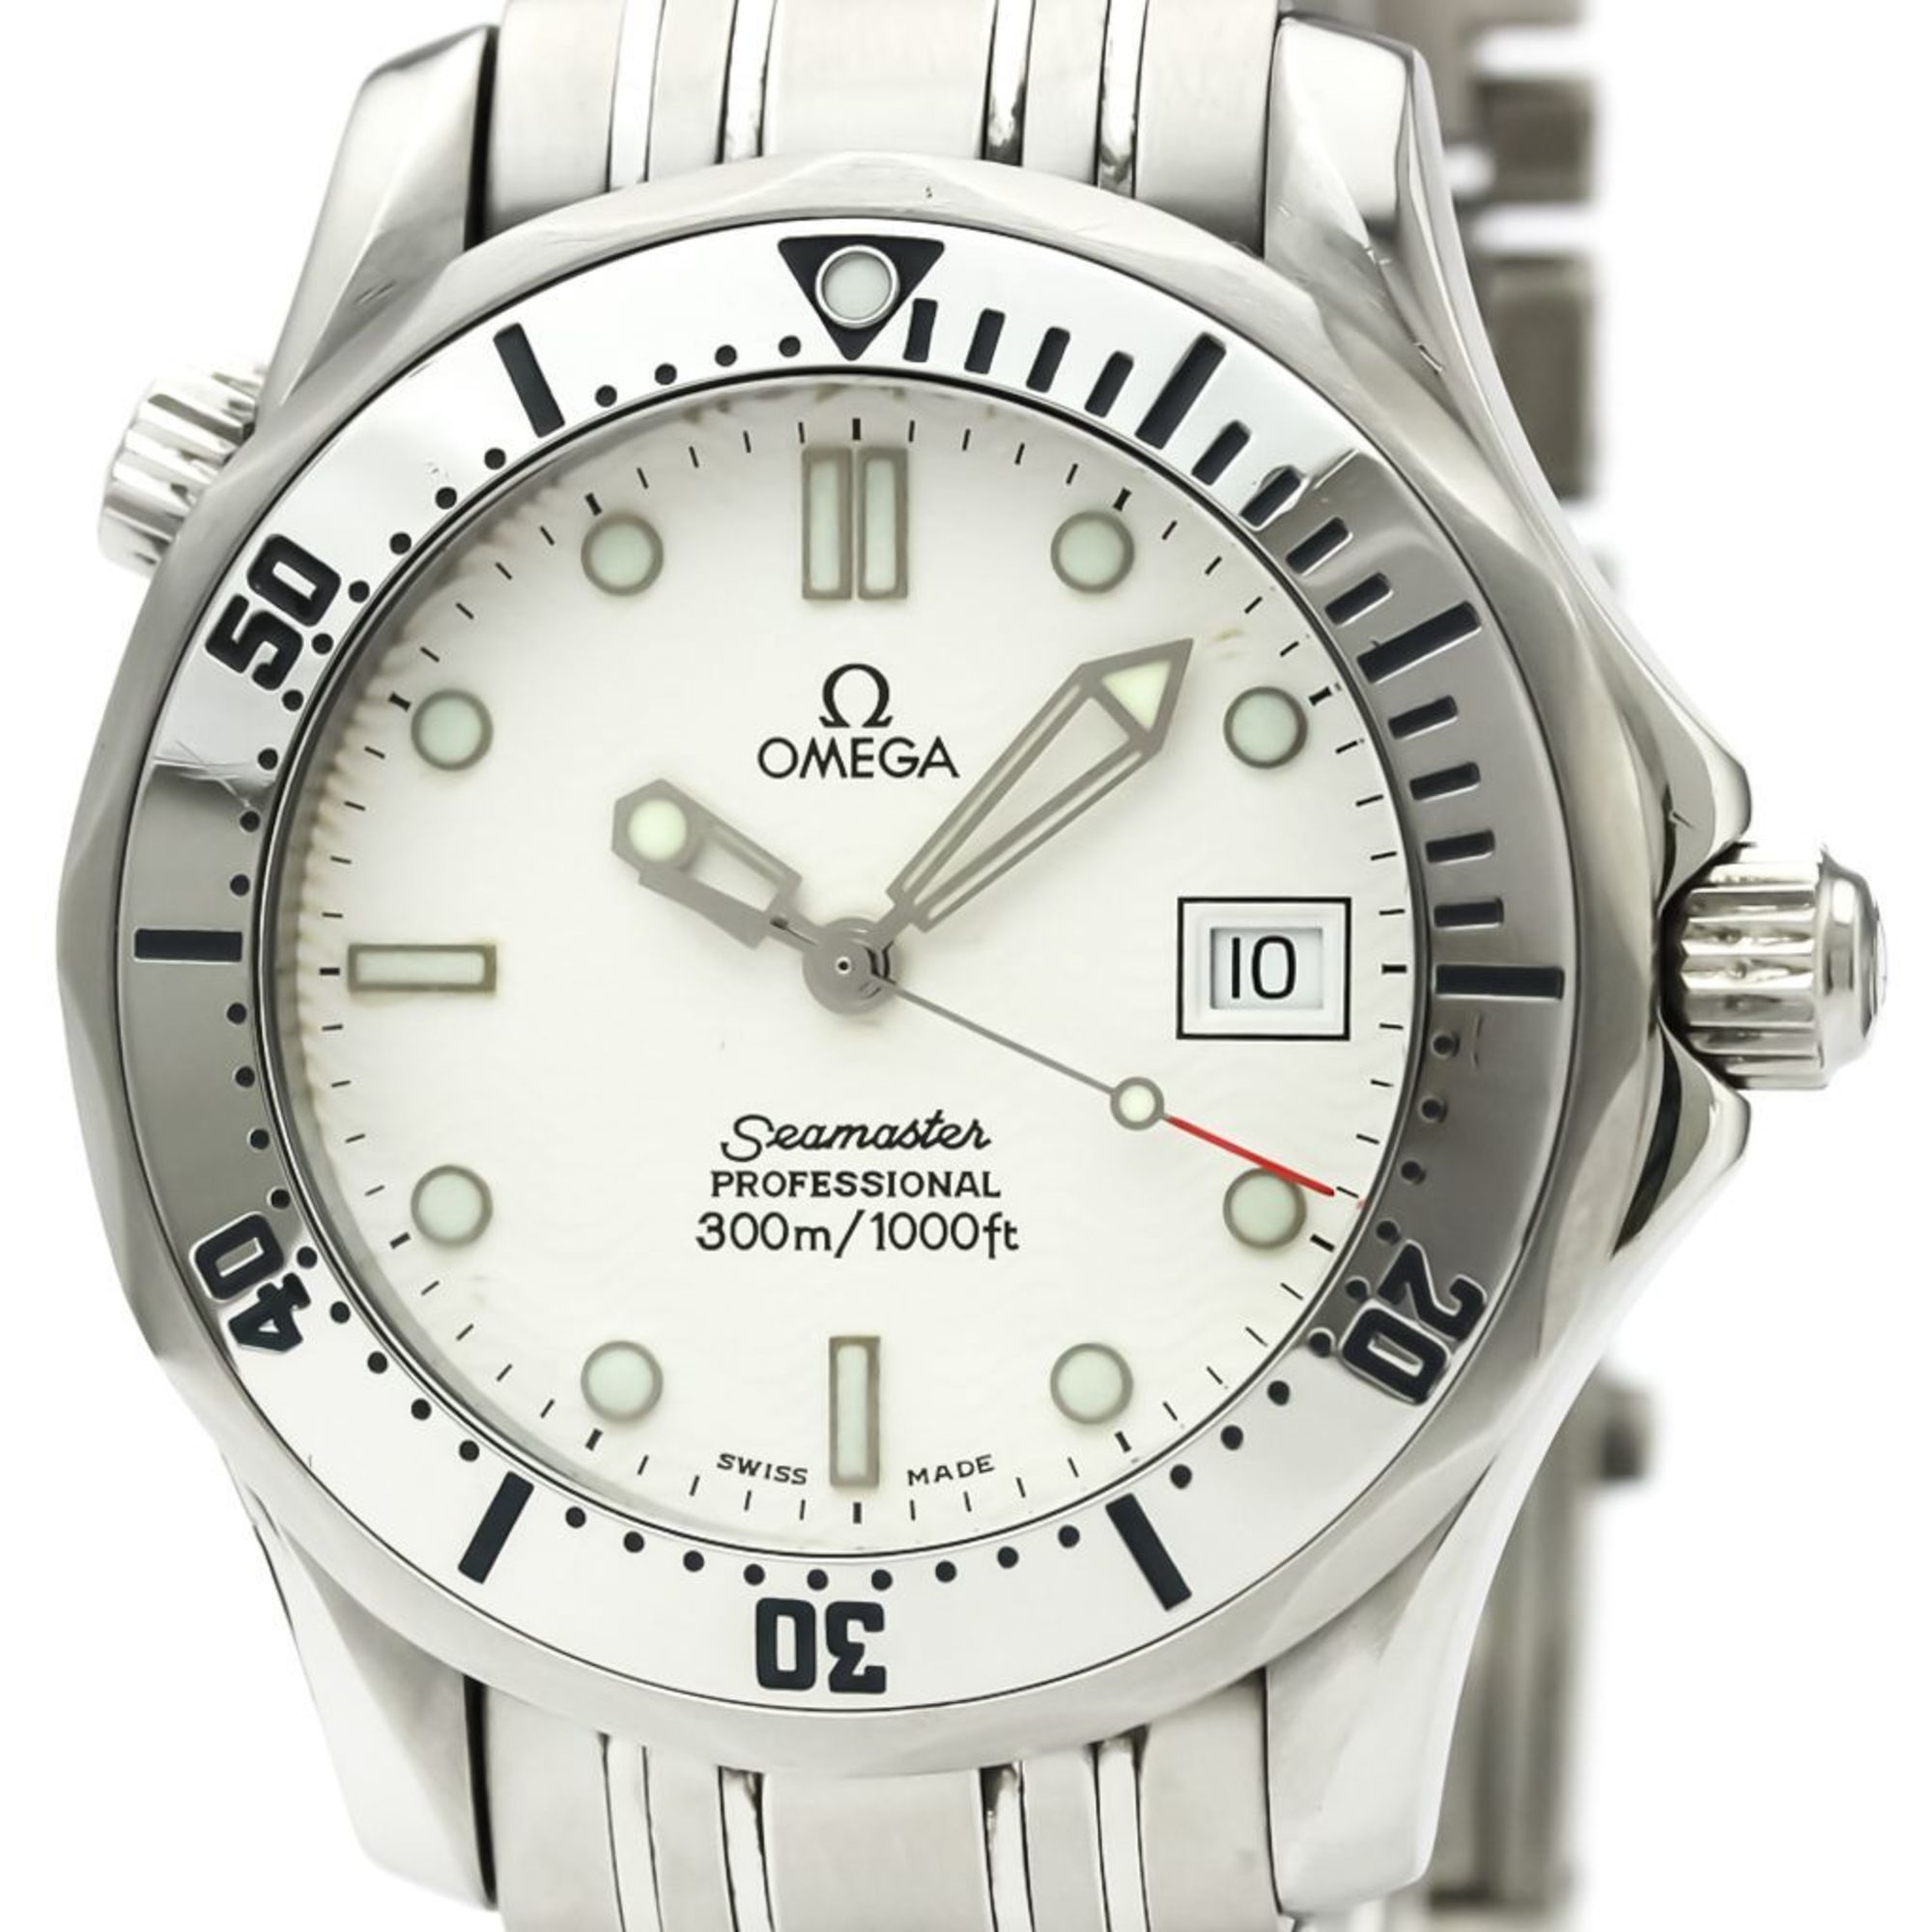 OMEGA Seamaster Professional 300M Steel Mid Size Watch 2562.20